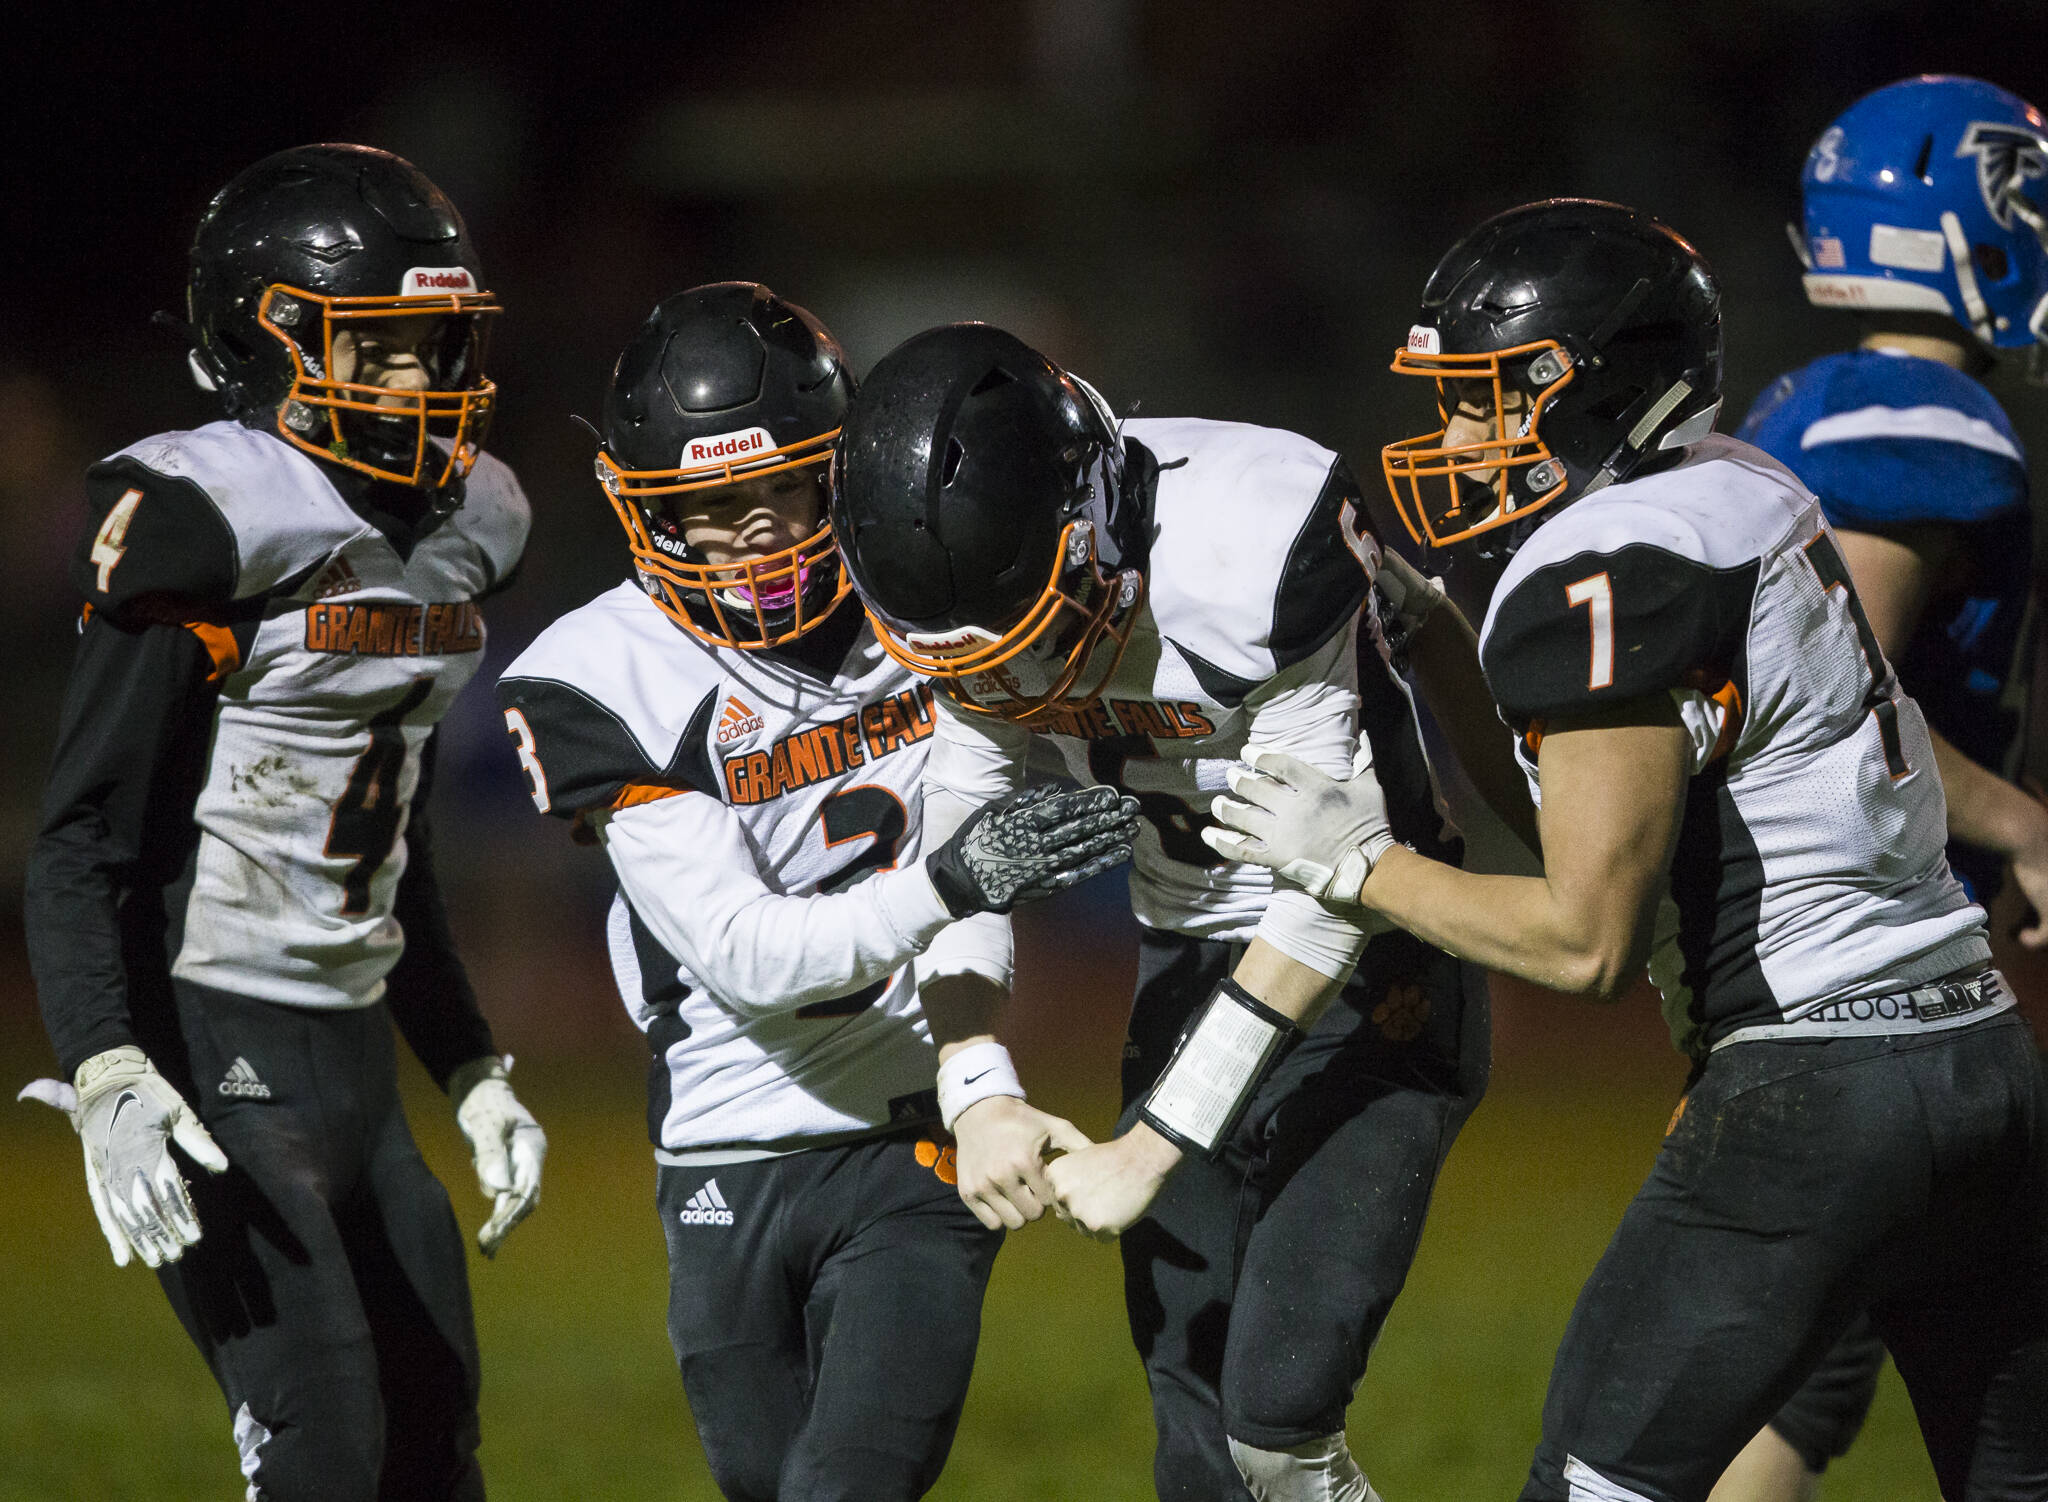 Riley Hoople ran for two touchdowns to lead Granite Falls to its first state playoff berth in more than three decades. (Olivia Vanni / The Herald)